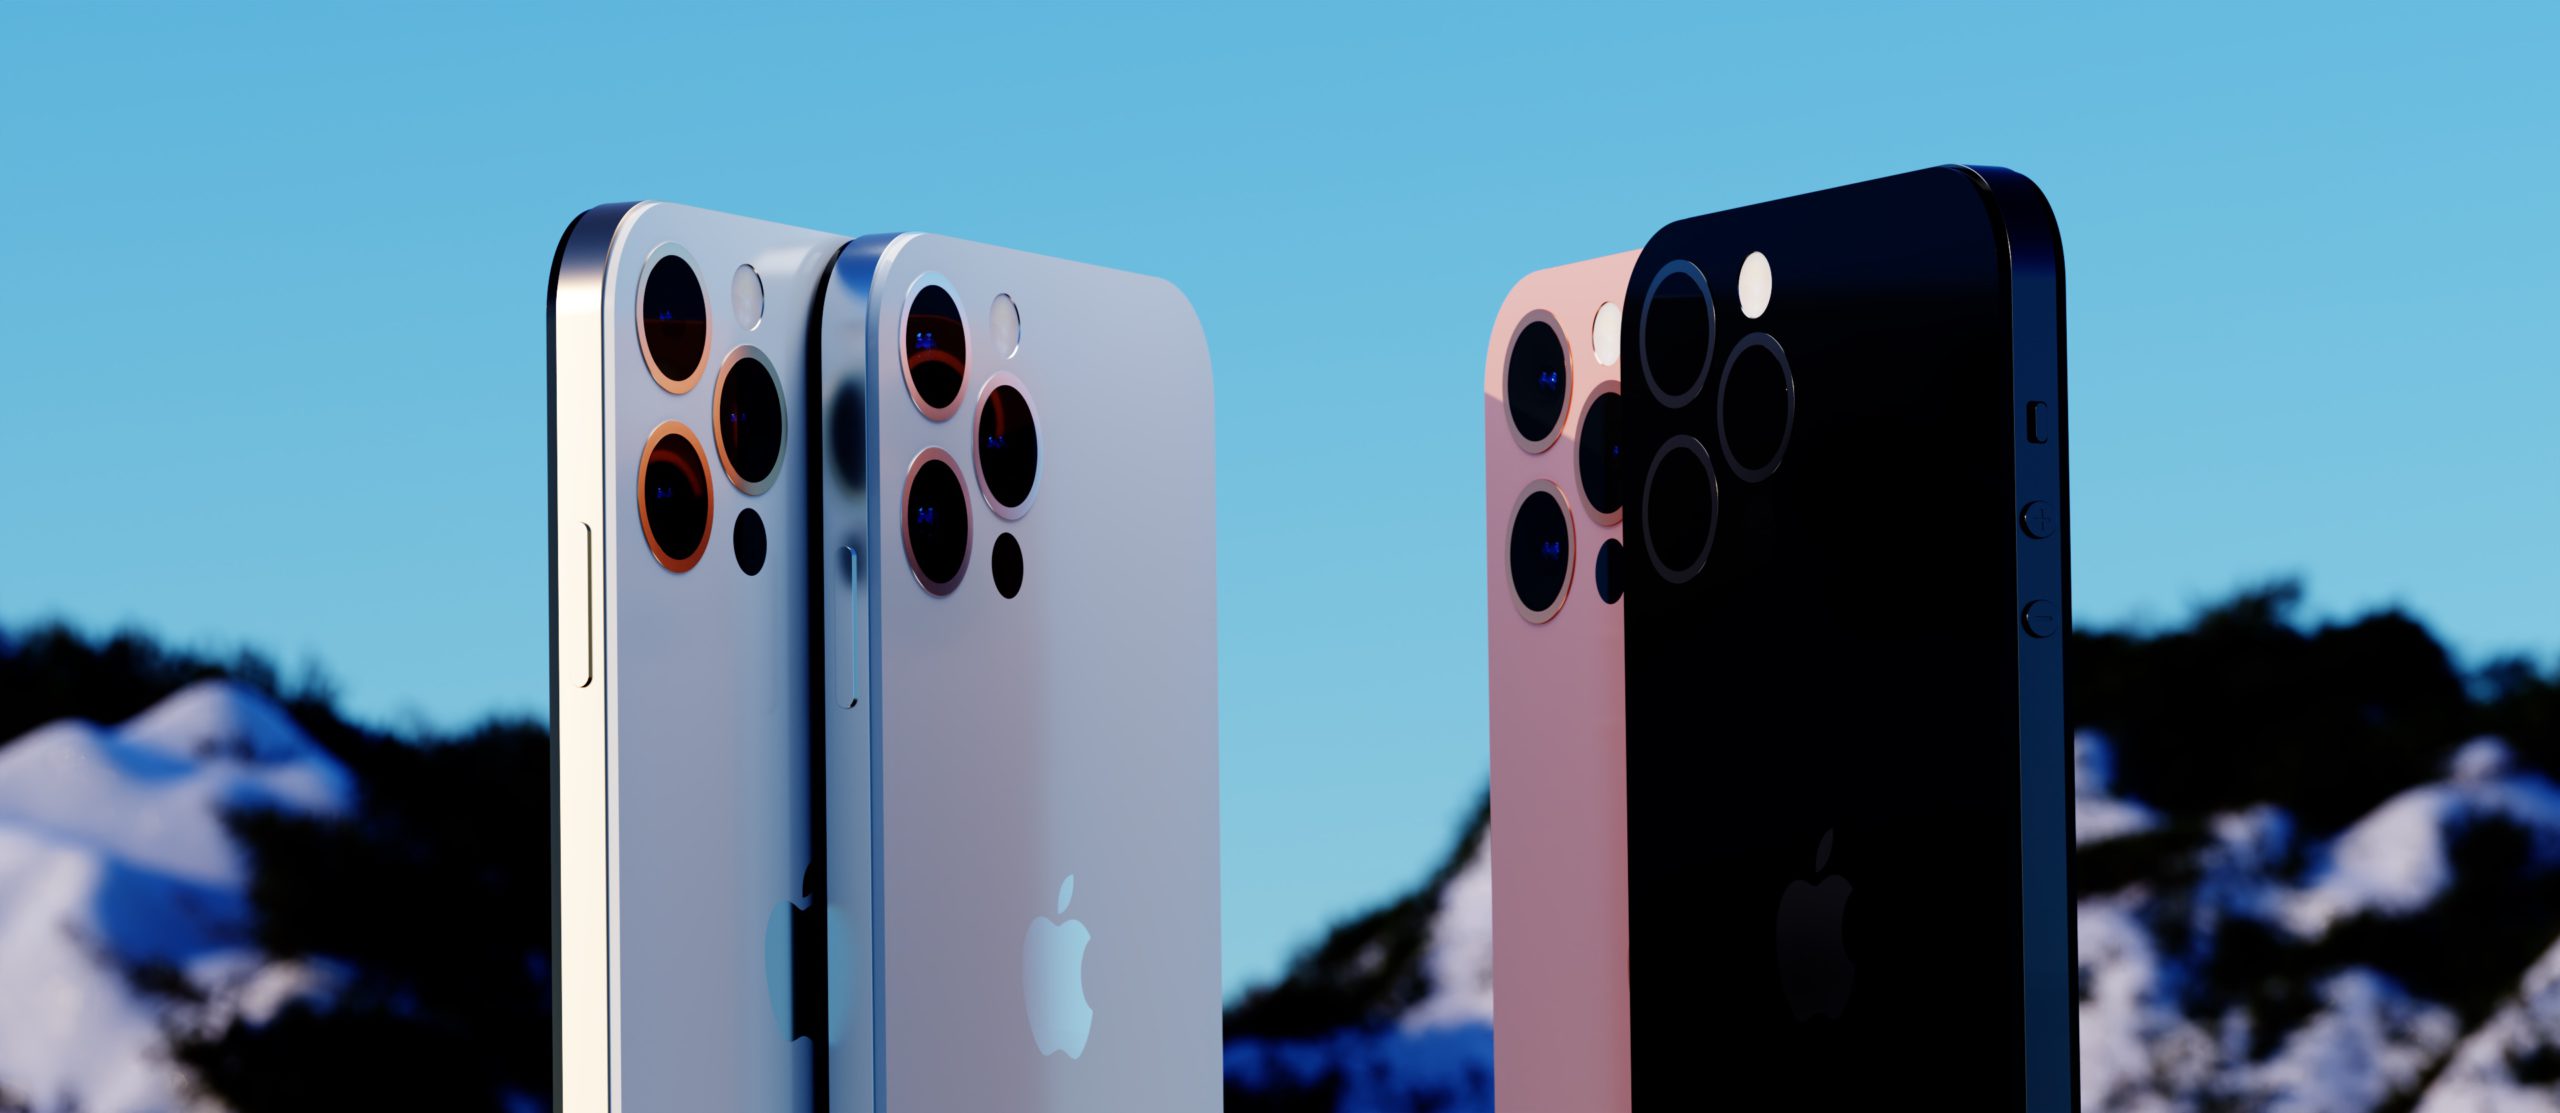 iPhone-14-Pro-Render-scaled